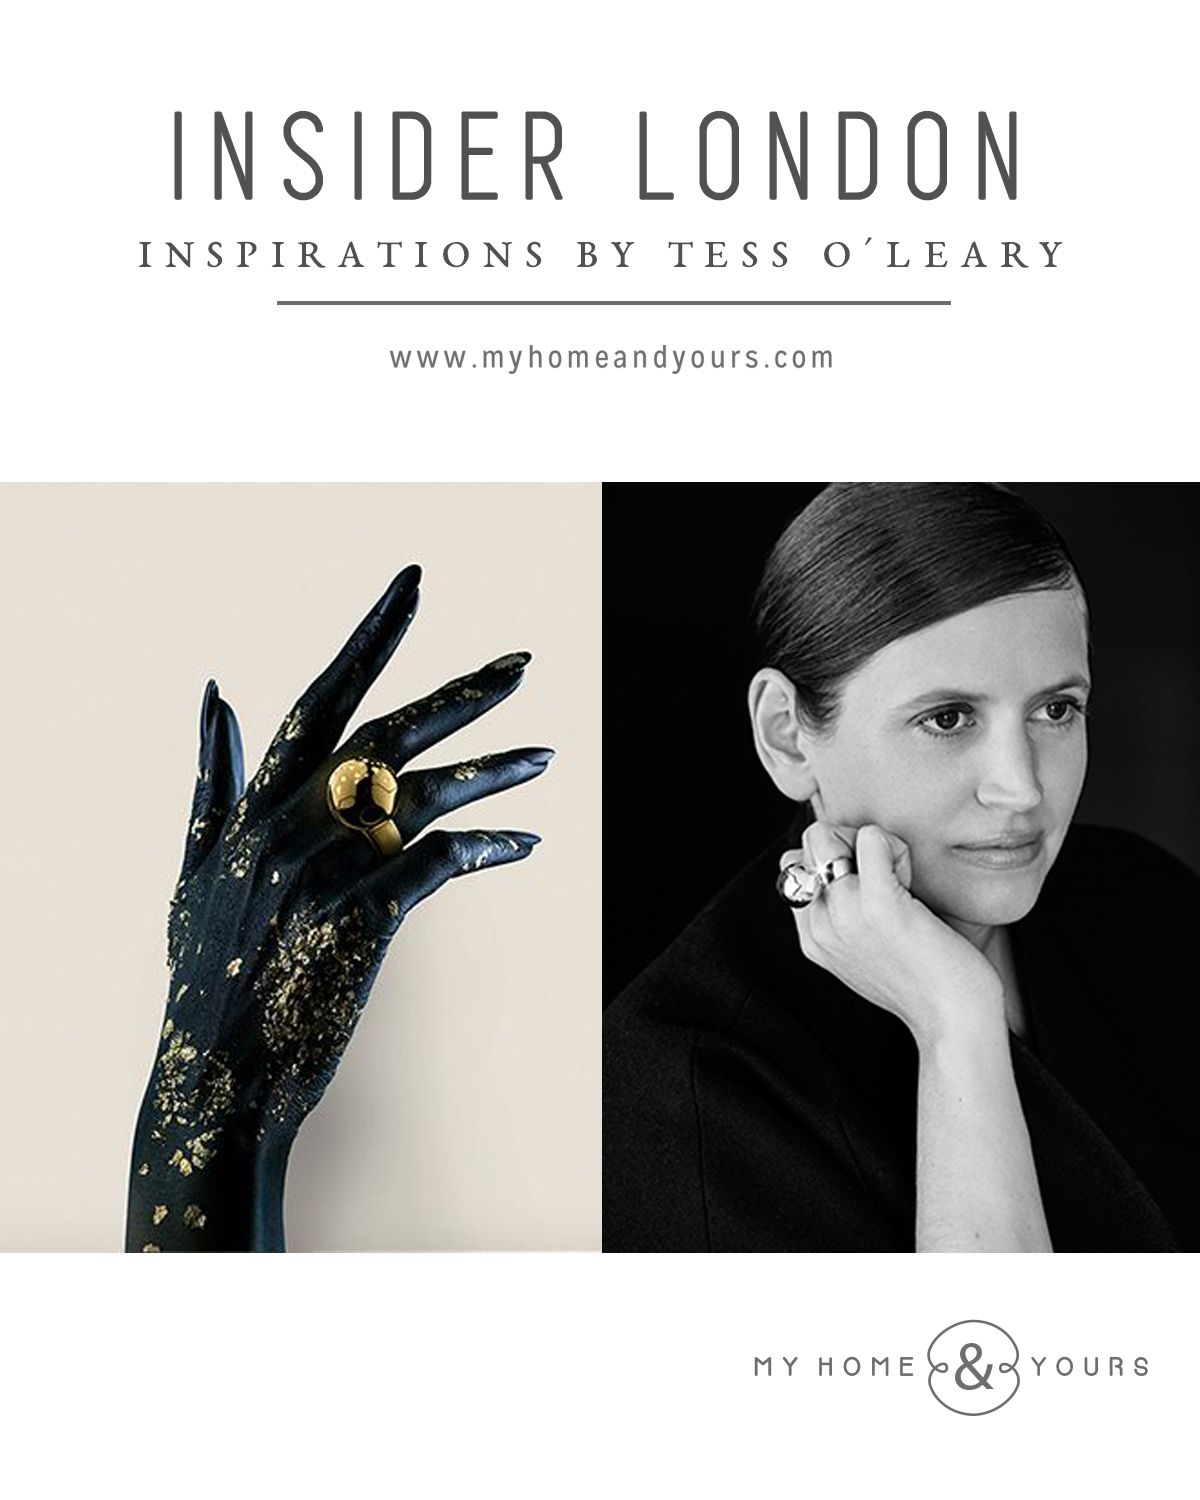 Insider London - Inspirations by Tess O´leary - by my home and yours blog for design and family lovers!